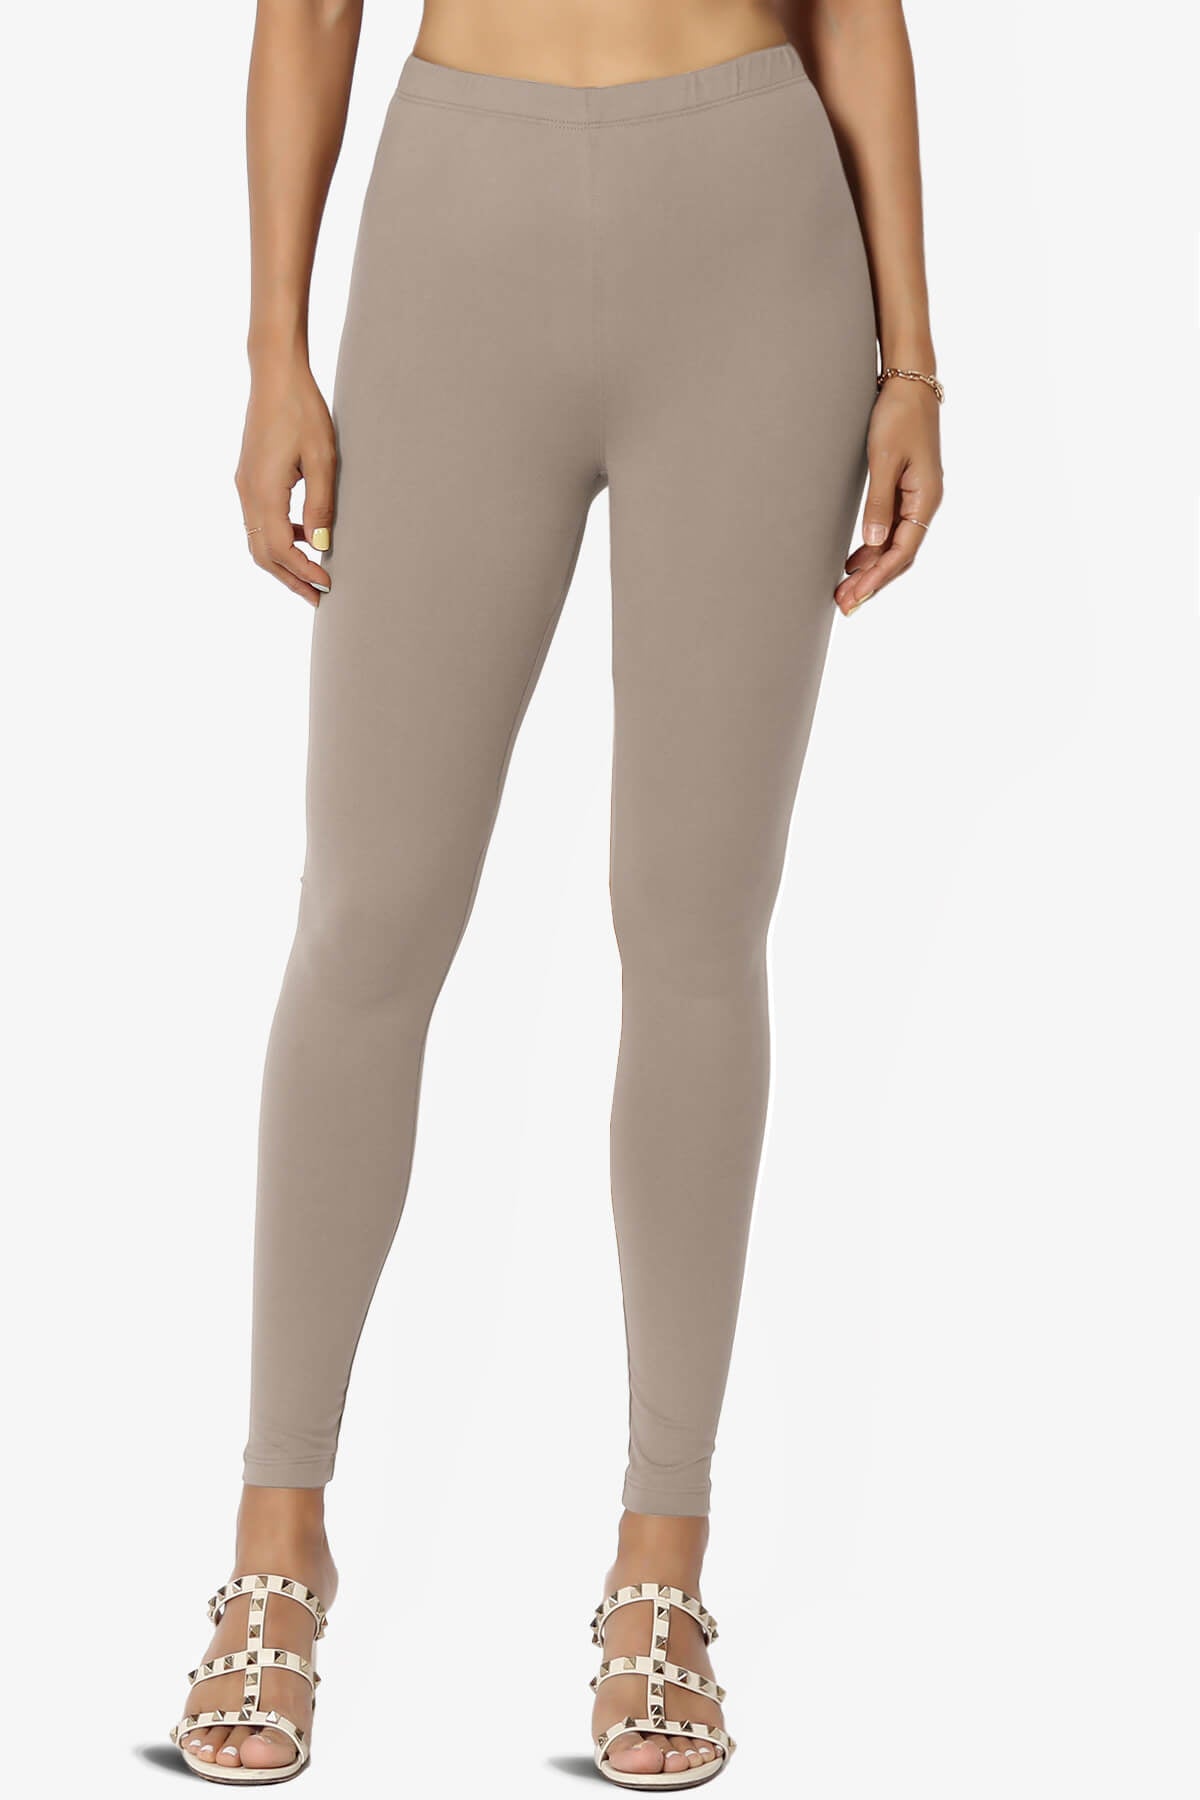 Load image into Gallery viewer, Loreen High Rise Microfiber Ankle Leggings LIGHT MOCHA_1
